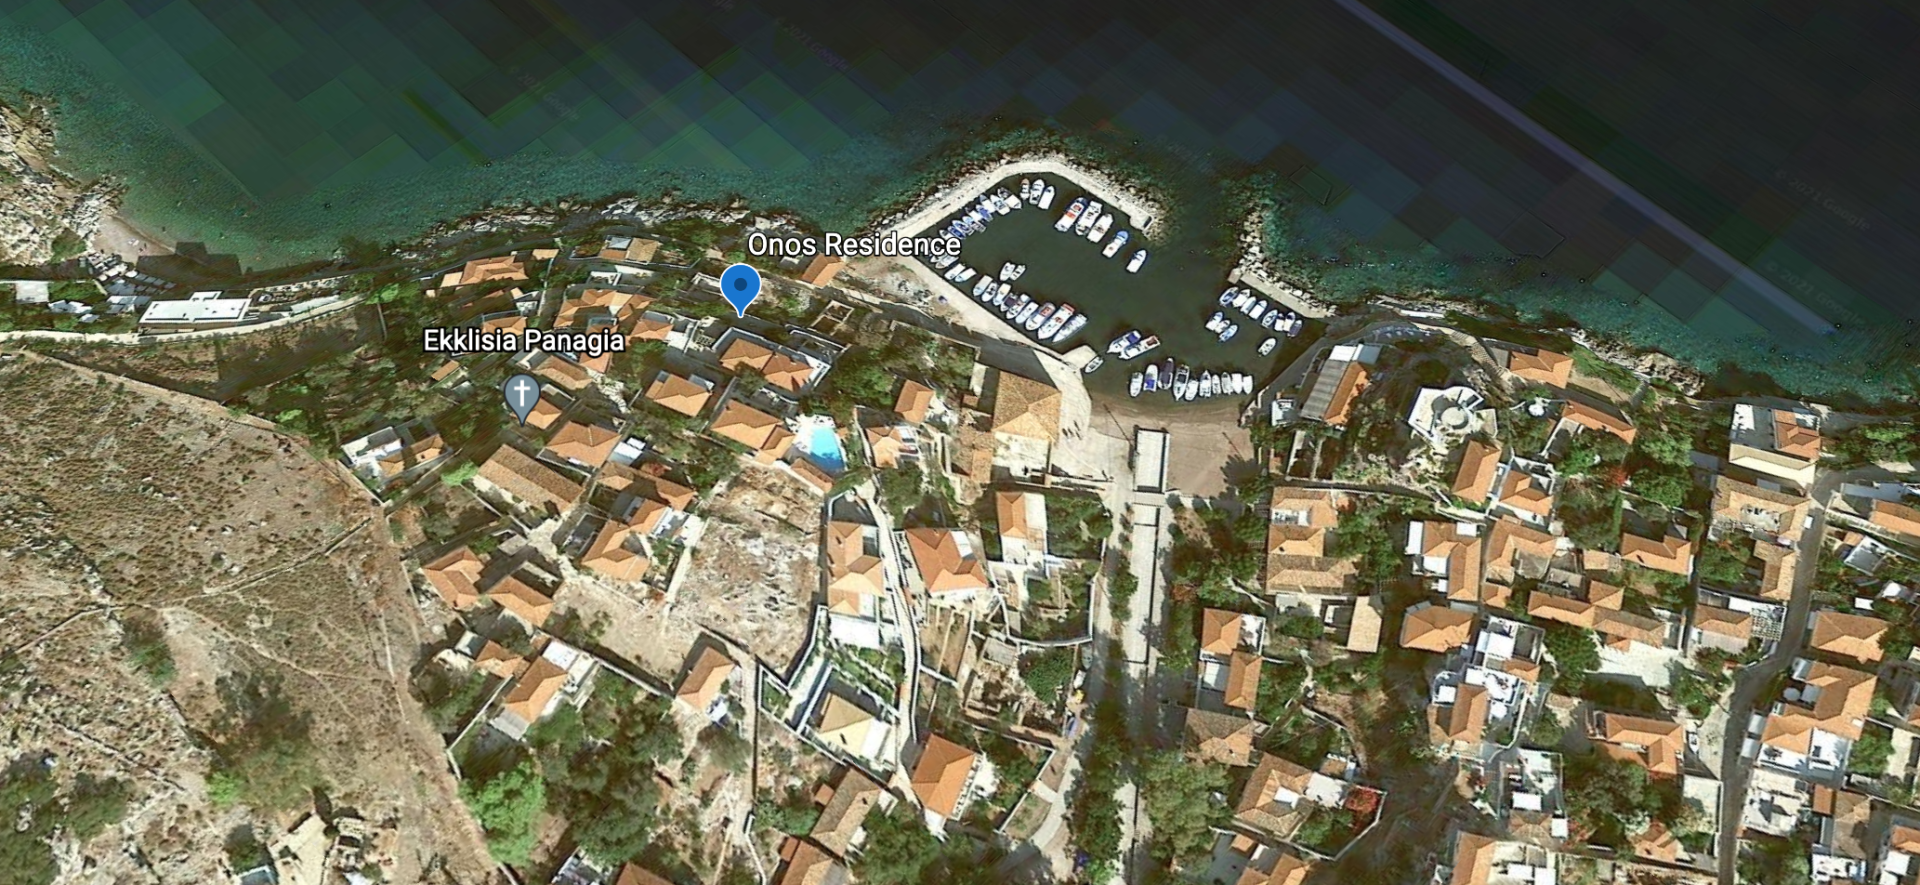 Location Map for the Onos Residence on Hydra Island Greece